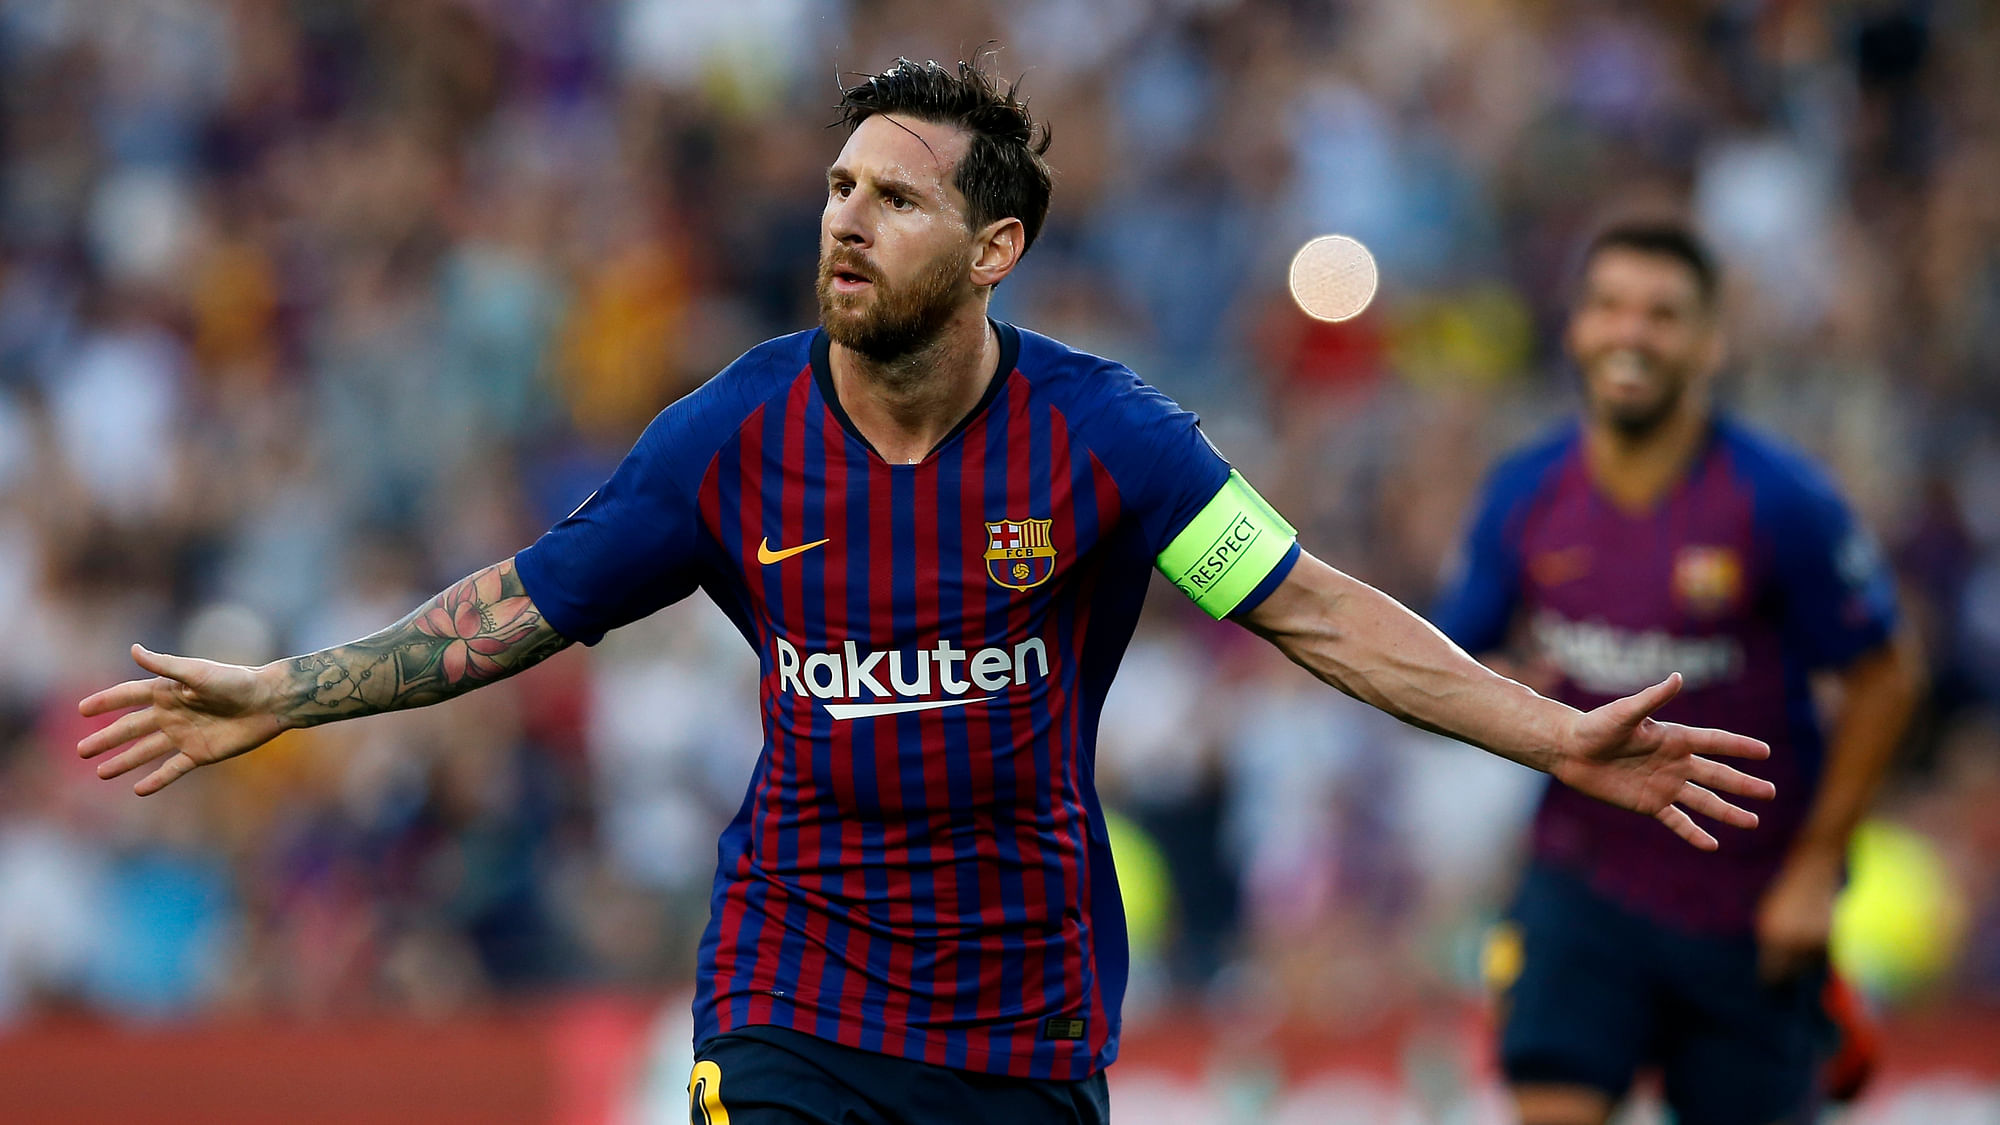 Barcelona forward Lionel Messi celebrates after scoring the opening goal of his team during the group B Champions League soccer match between FC Barcelona and PSV Eindhoven at the Camp Nou stadium in Barcelona, Spain, Tuesday, Sept. 18, 2018.&nbsp;